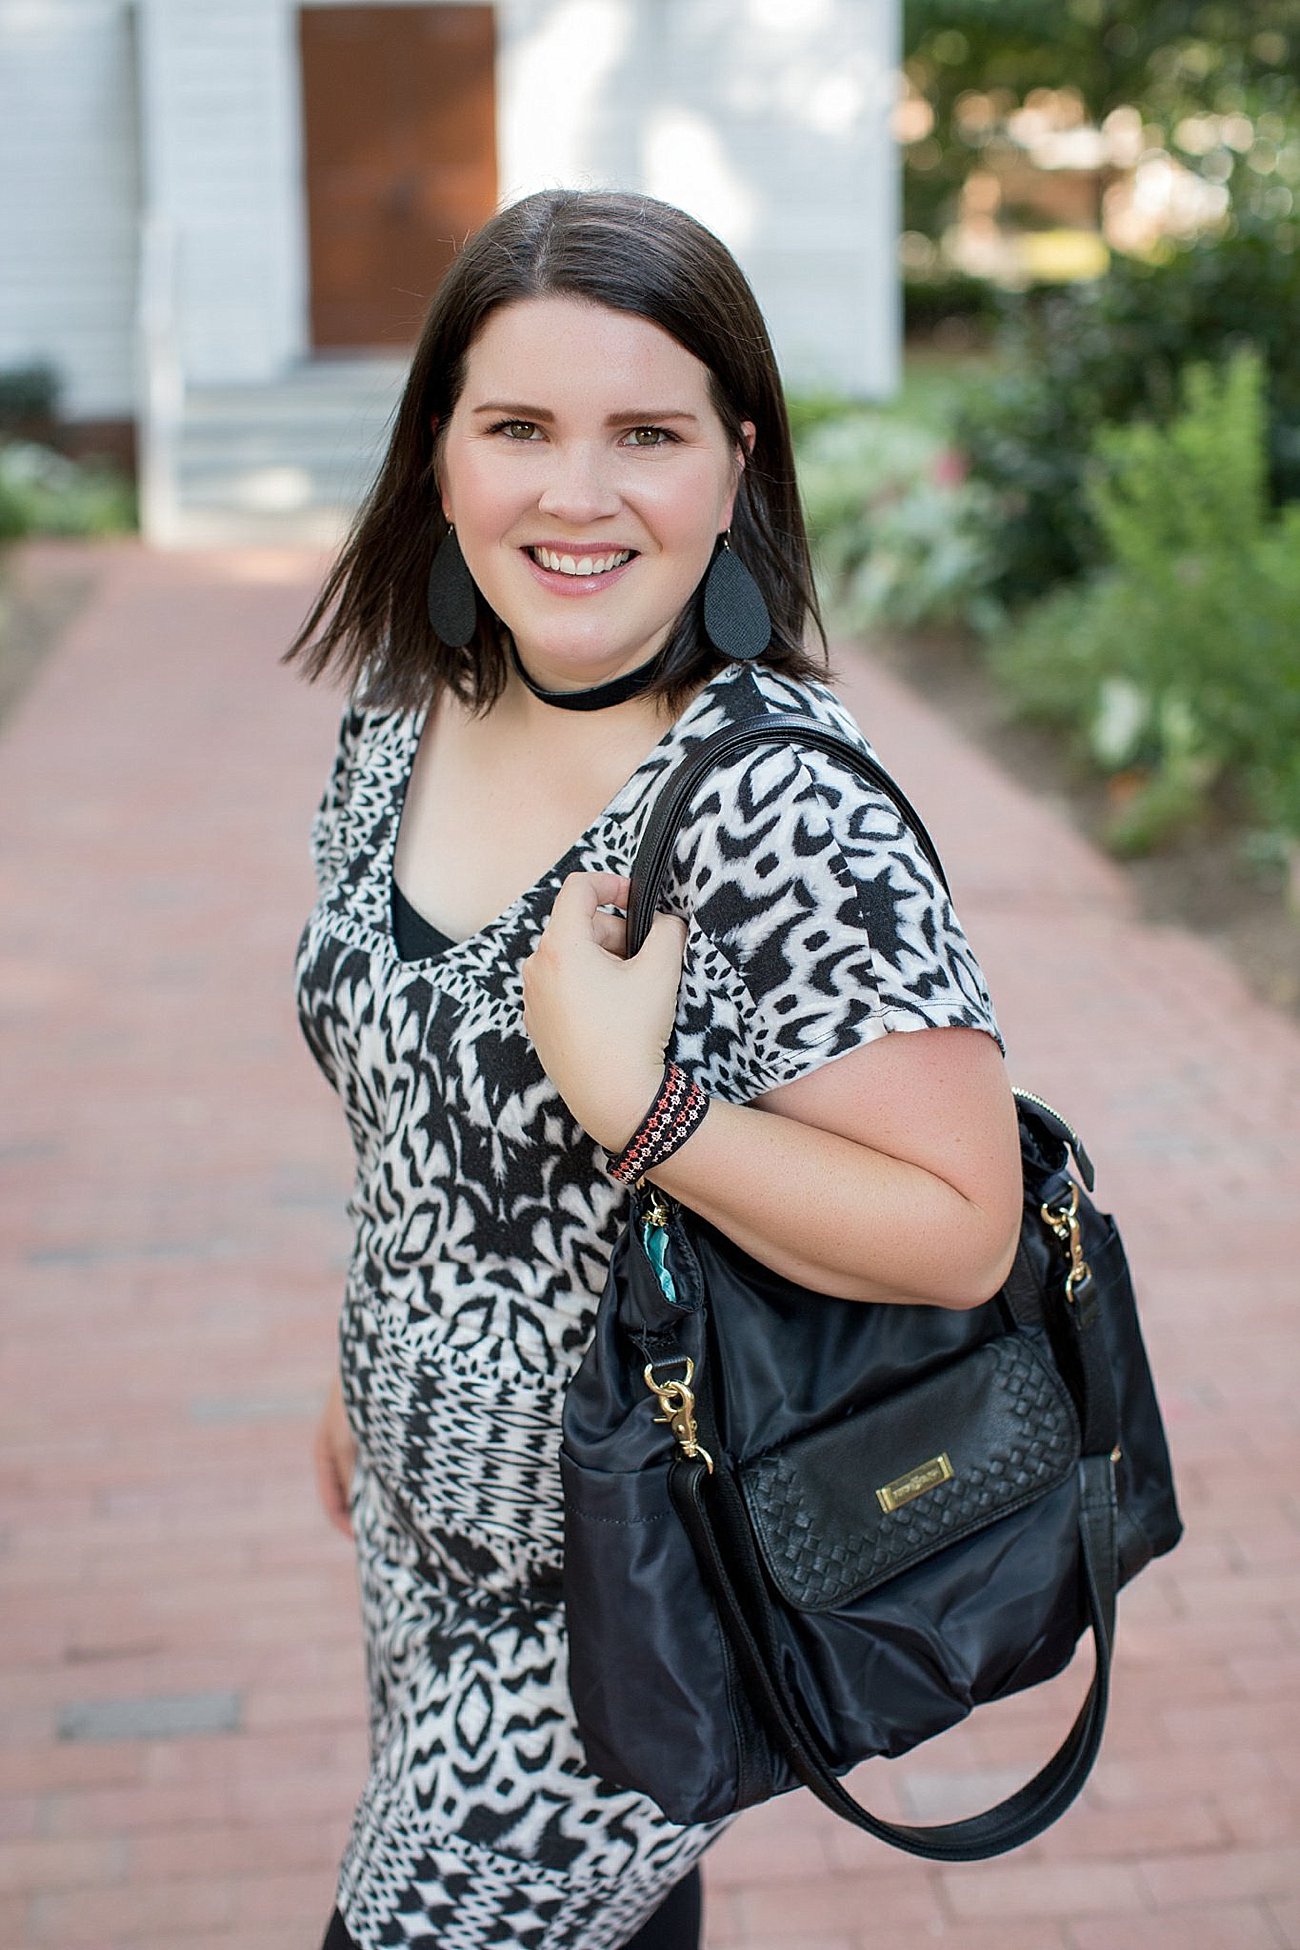 Threads for Thought "Mia Dress", LulaRoe black leggings, Lily Jade diaper bag, Nickel & Suede choker, Nickel & Suede earrings, Darzah stitched leather cuff | ethical fashion blogger, north carolina fashion blogger (12)